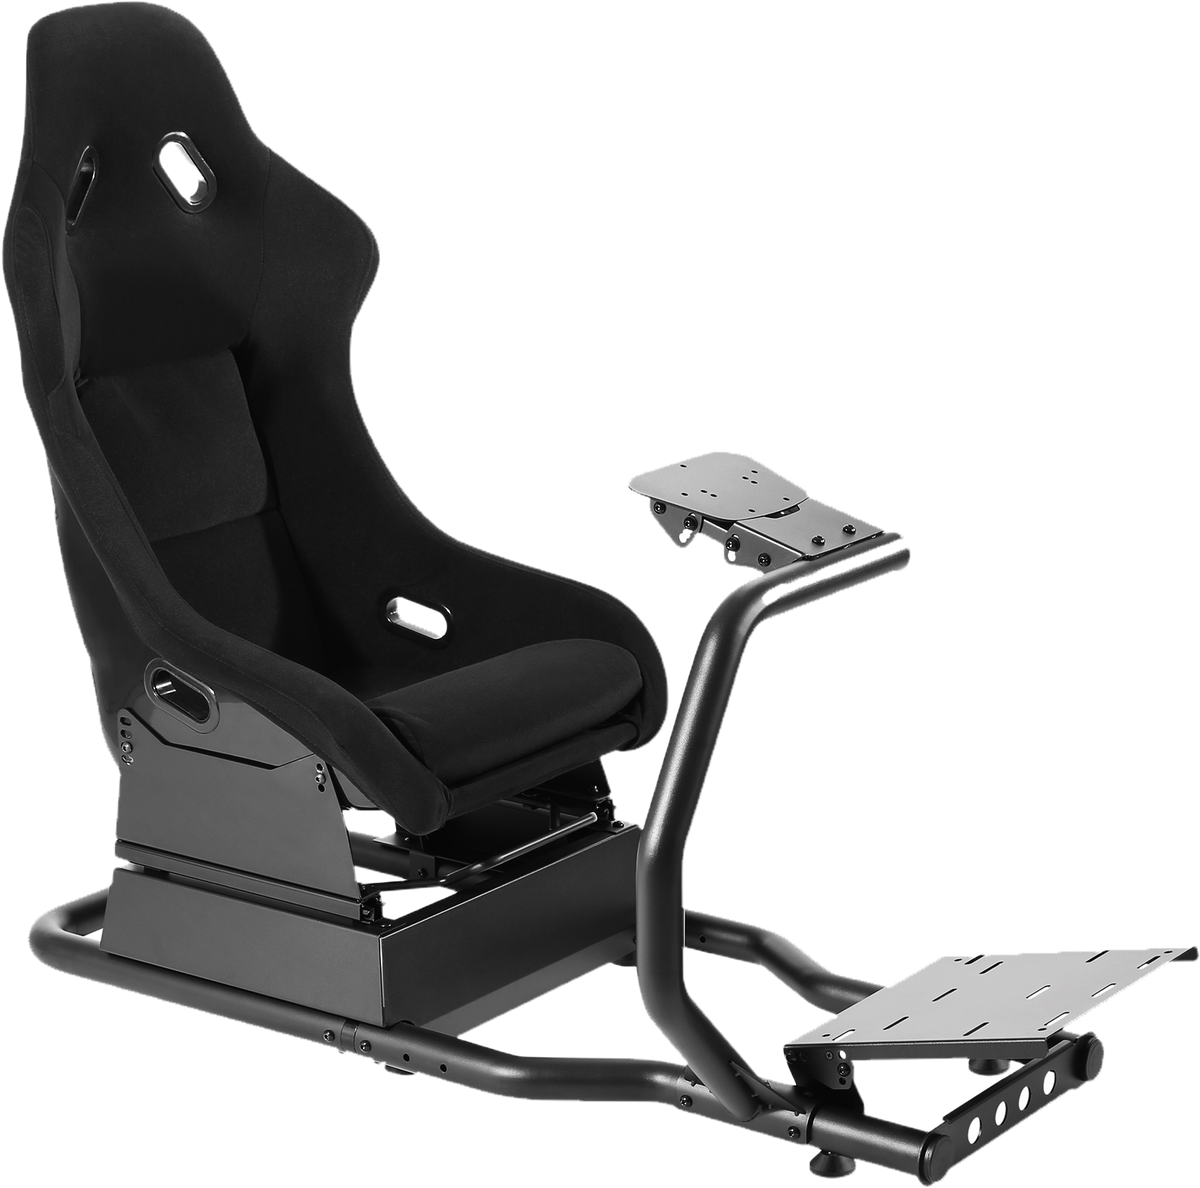 GAMEON Pro Racing Simulator Cockpit With Gear Shifter Mount - Black